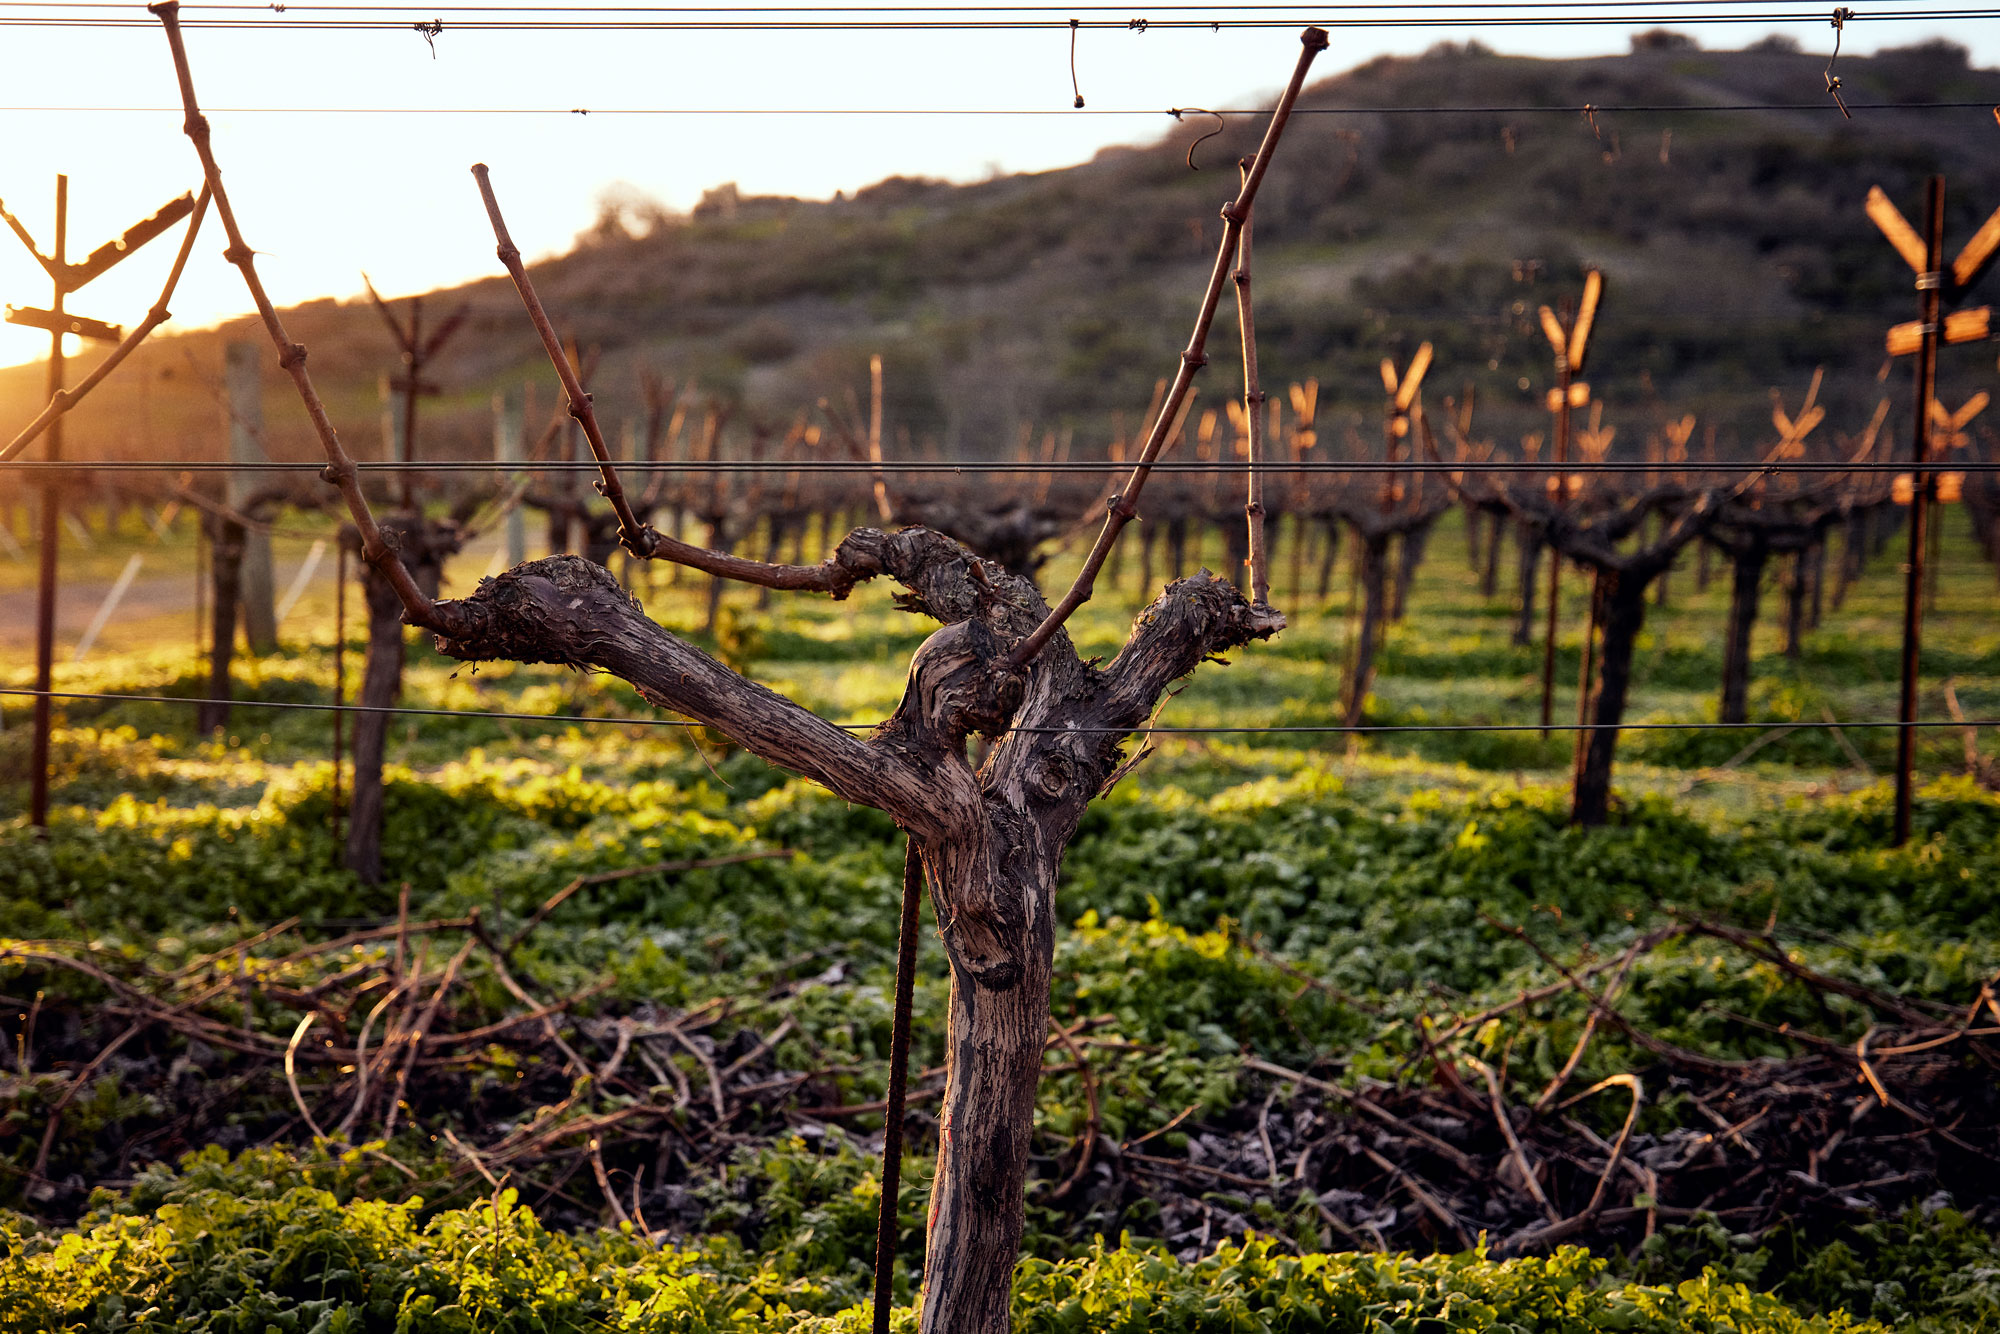 Dormant grape vines with other vines behind it